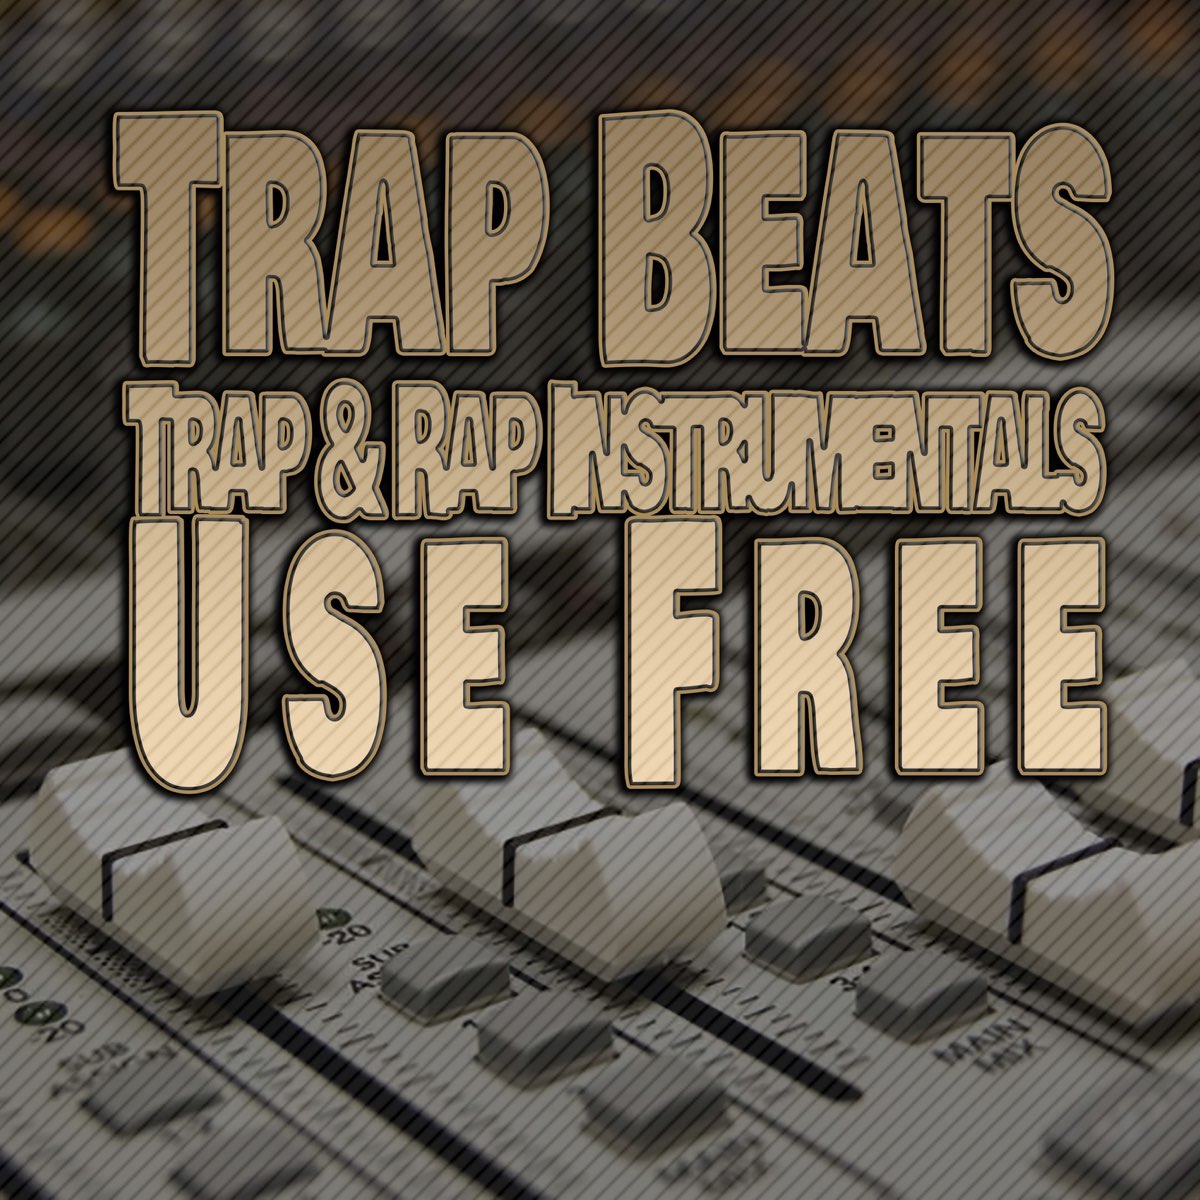 Trap Beats Trap and Rap Use - EP by Inhar Beats on Apple